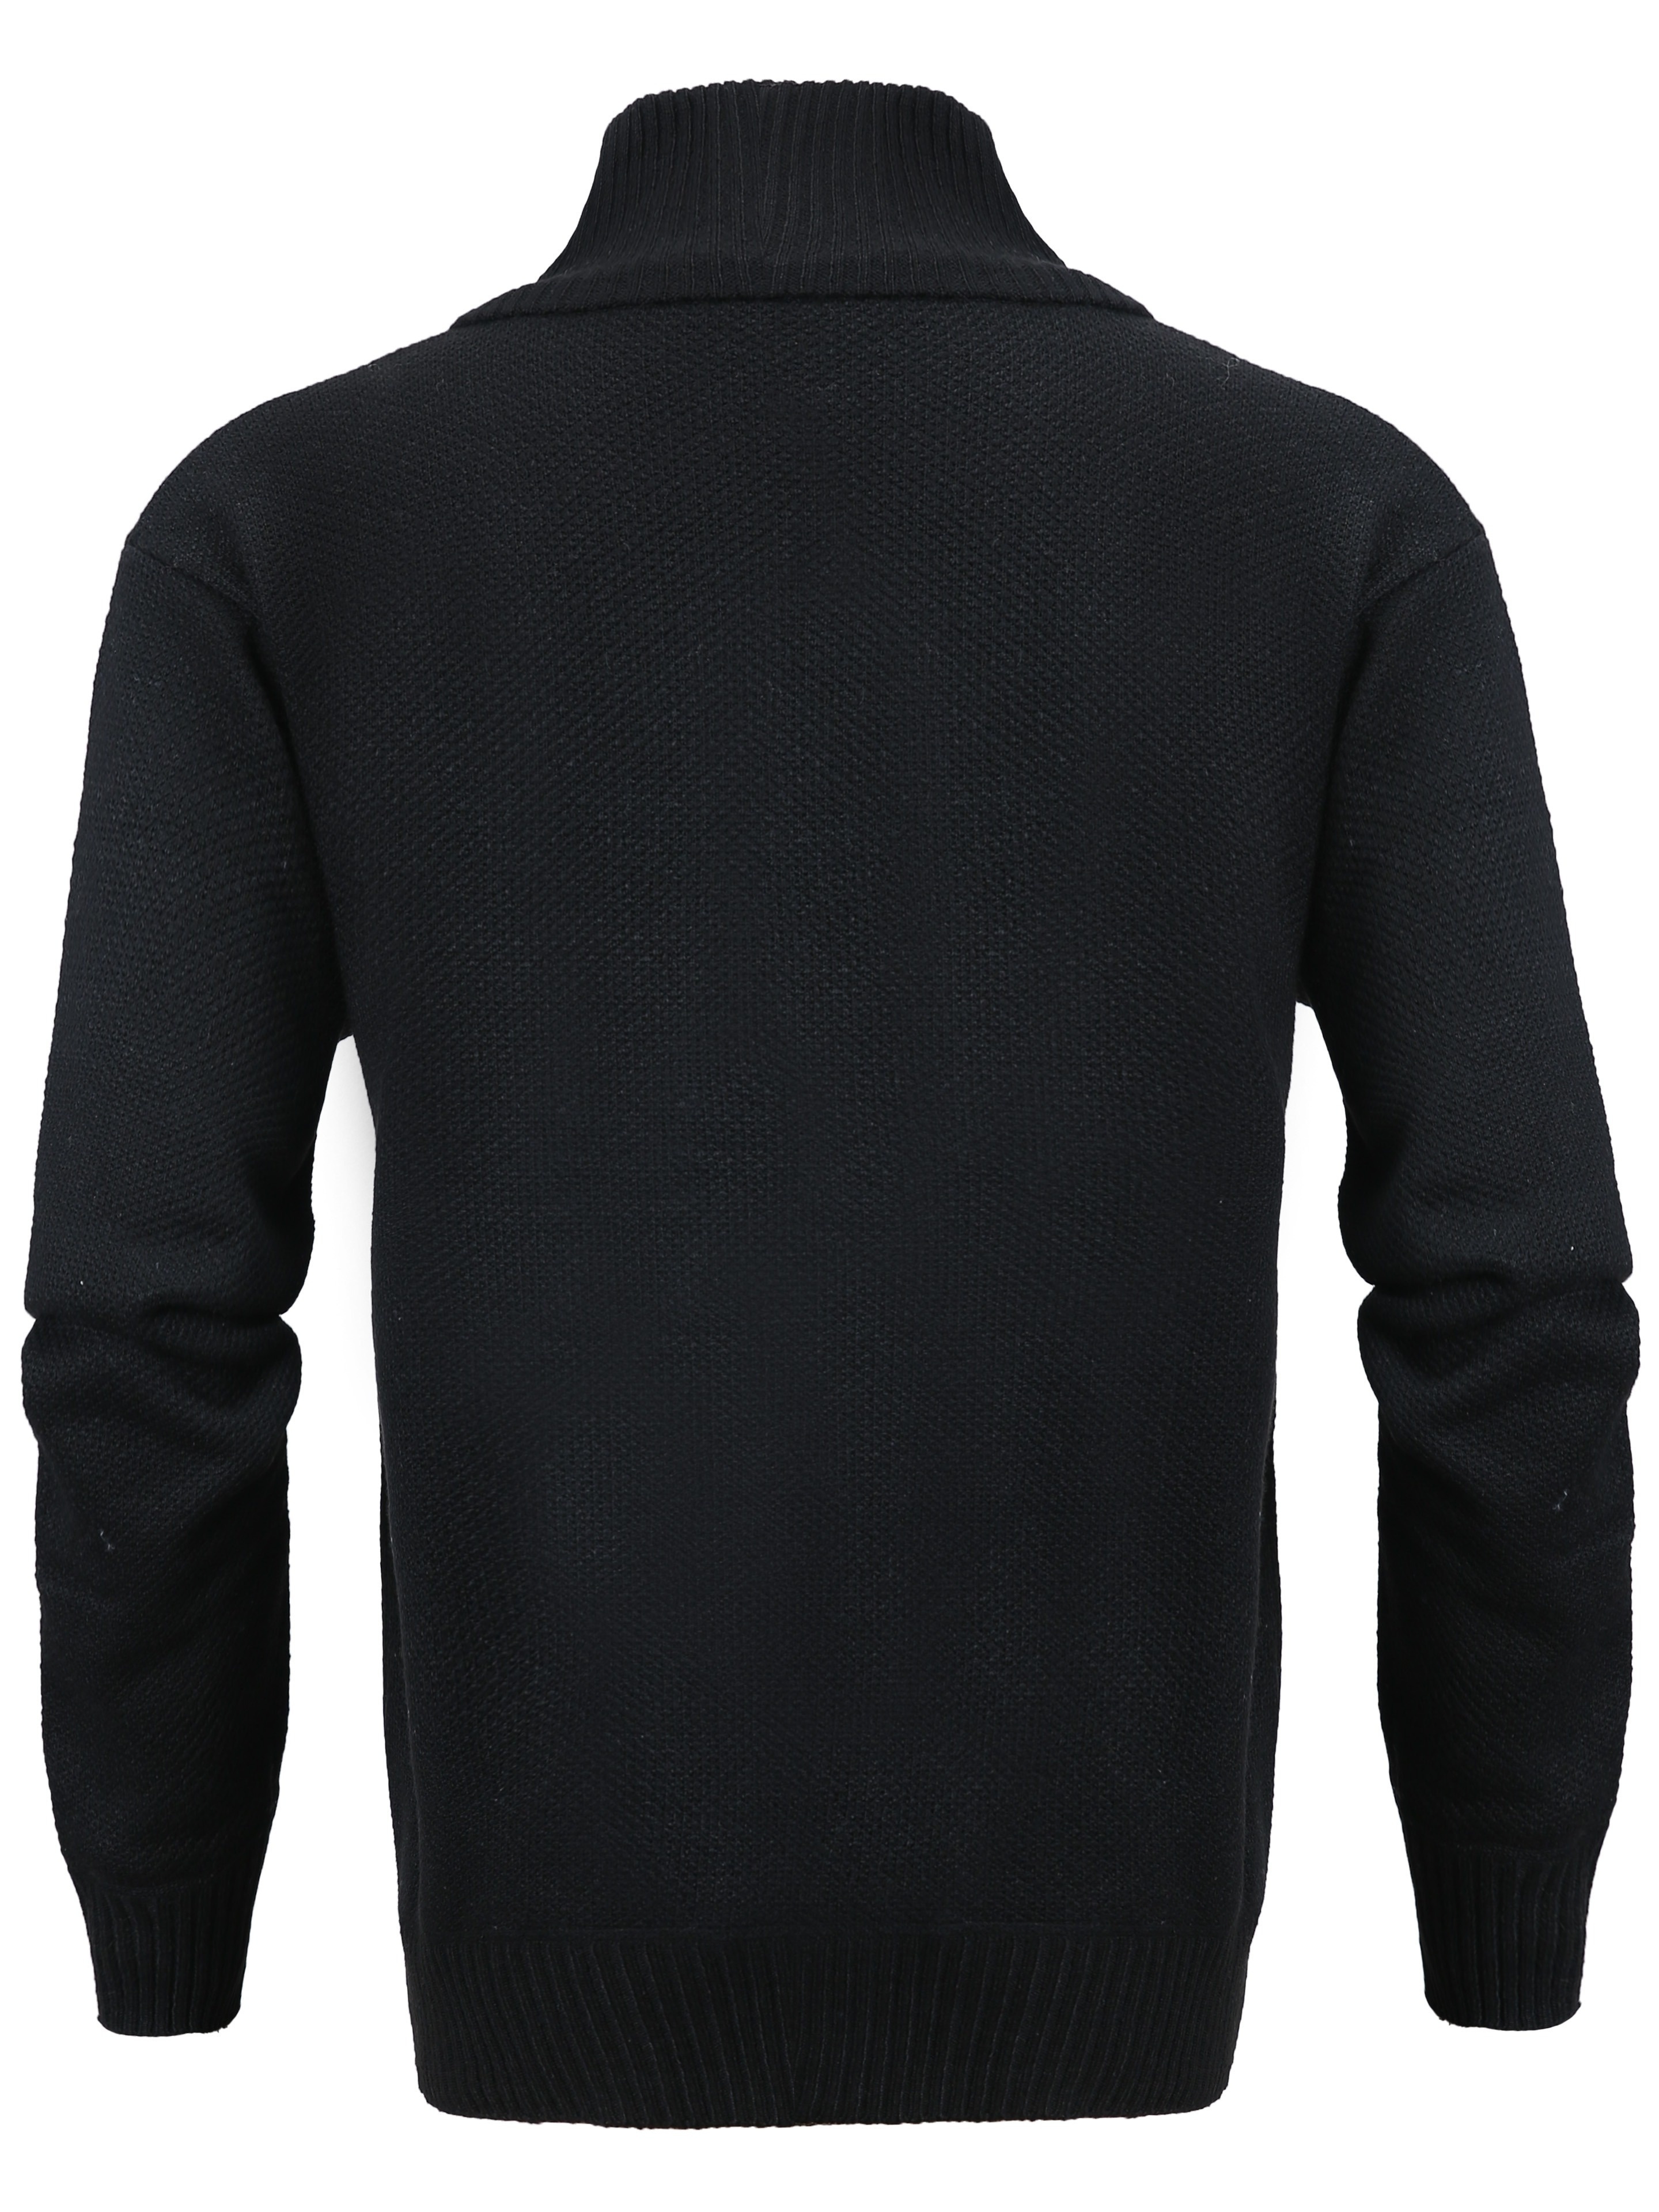 Winter Turtleneck Thick Mens Sweaters Casual Turtle Neck Solid Color  Quality Warm Slim Pullover Men